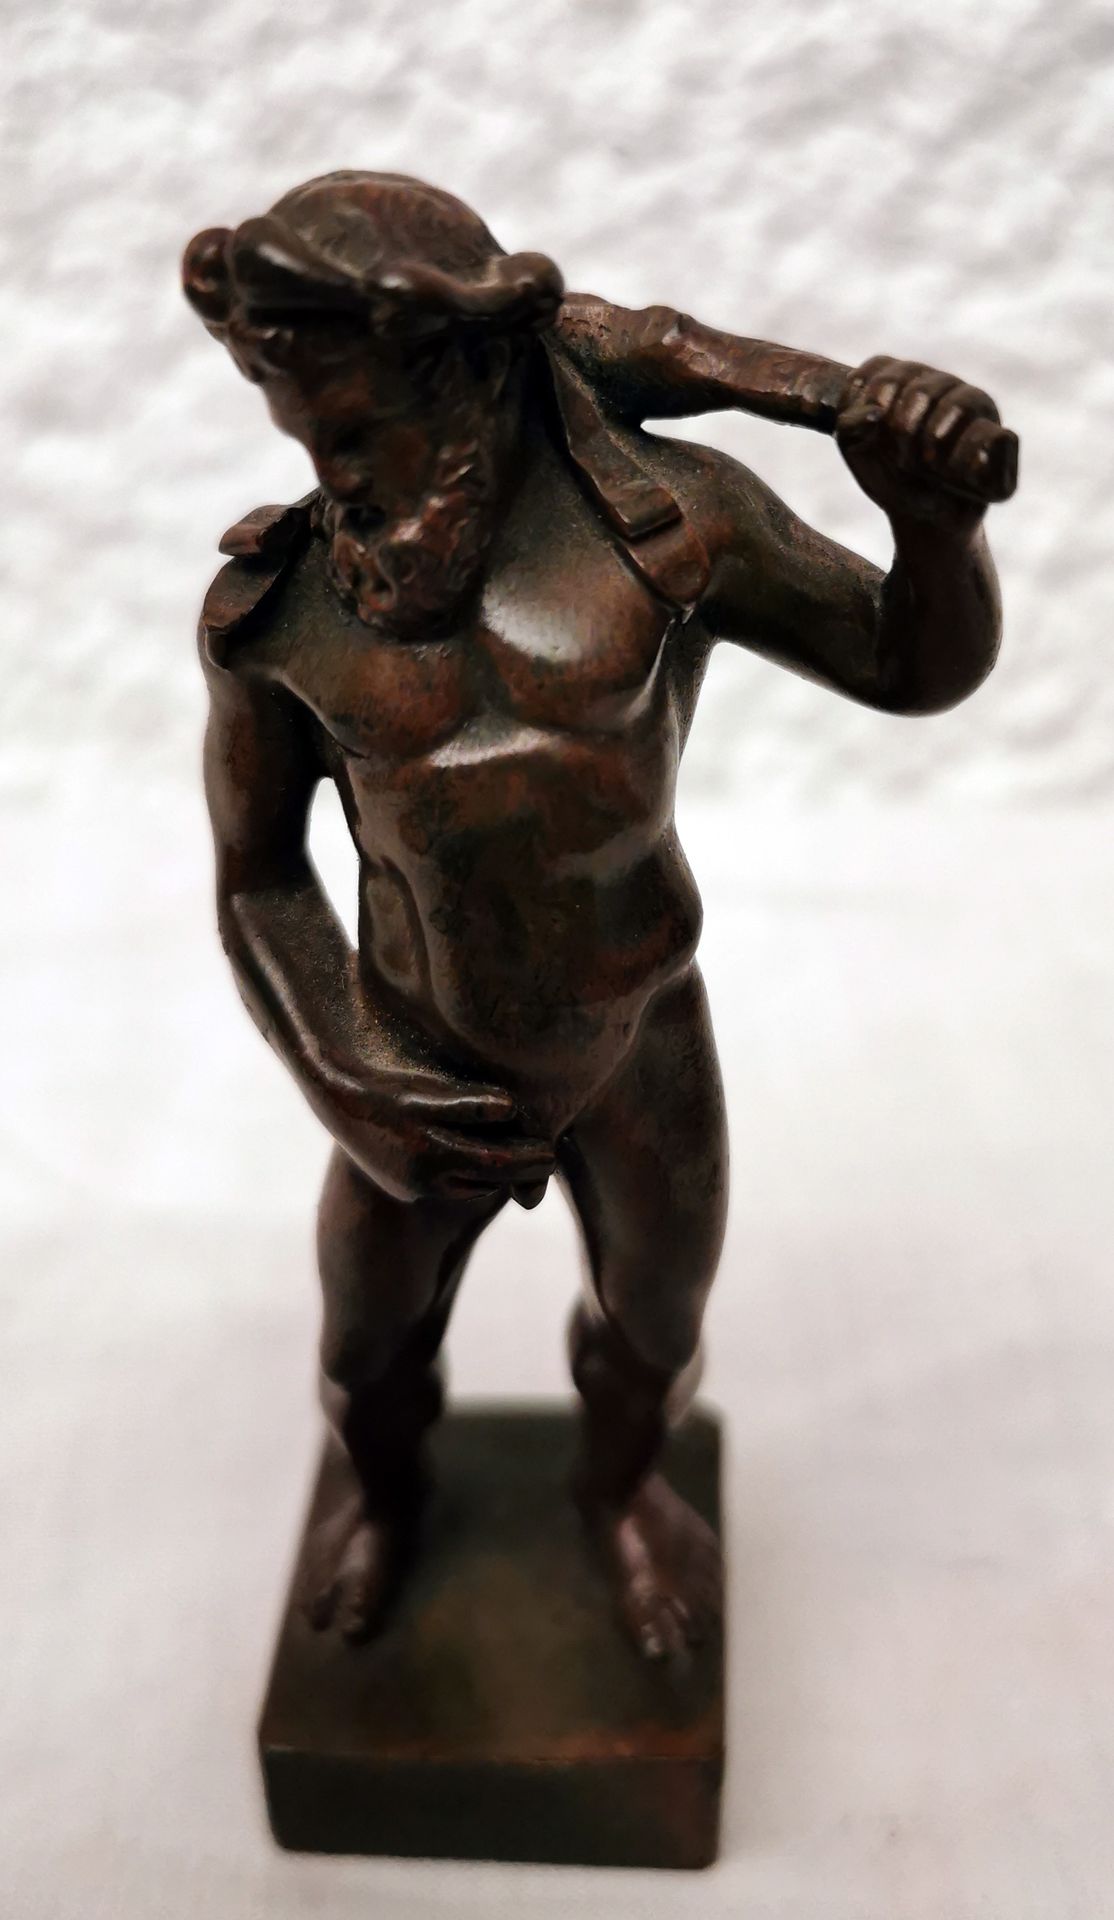 LE GEANT A LA MASSUE "THE GIANT WITH THE CLUB" BRONZE WITH MEDALLION PATINA ON A&hellip;